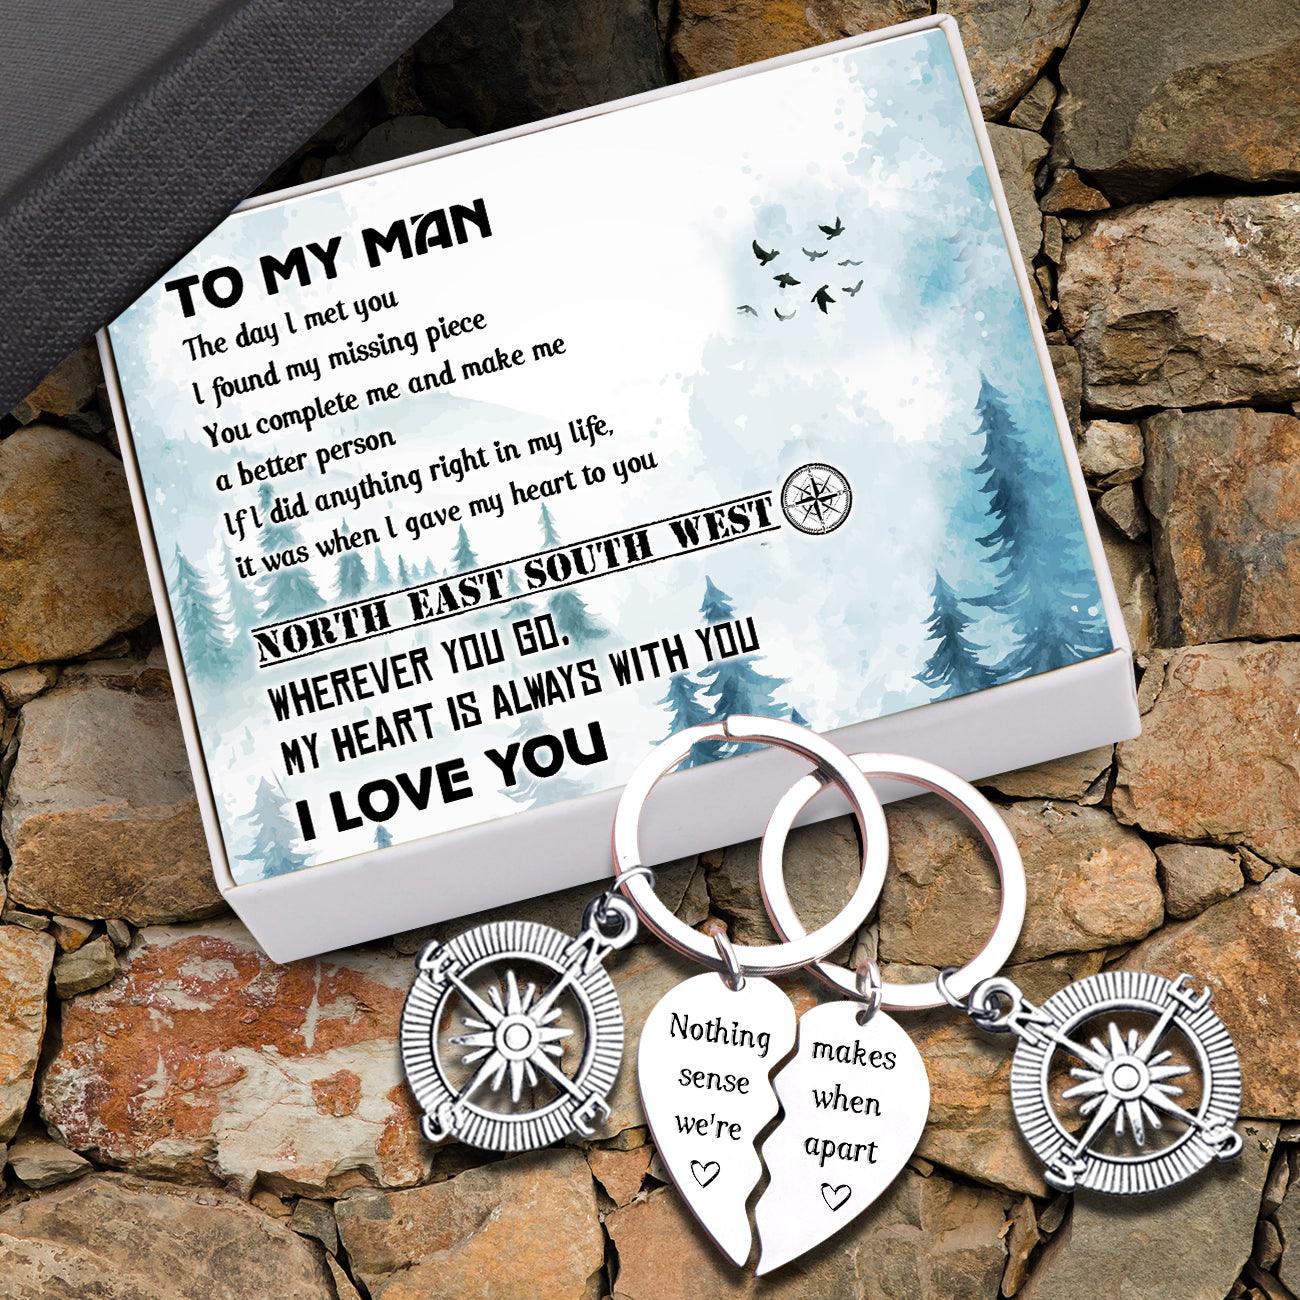 Compass Puzzle Keychains - Travel - To My Man - Wherever You Go - Augkdf26001 - Gifts Holder